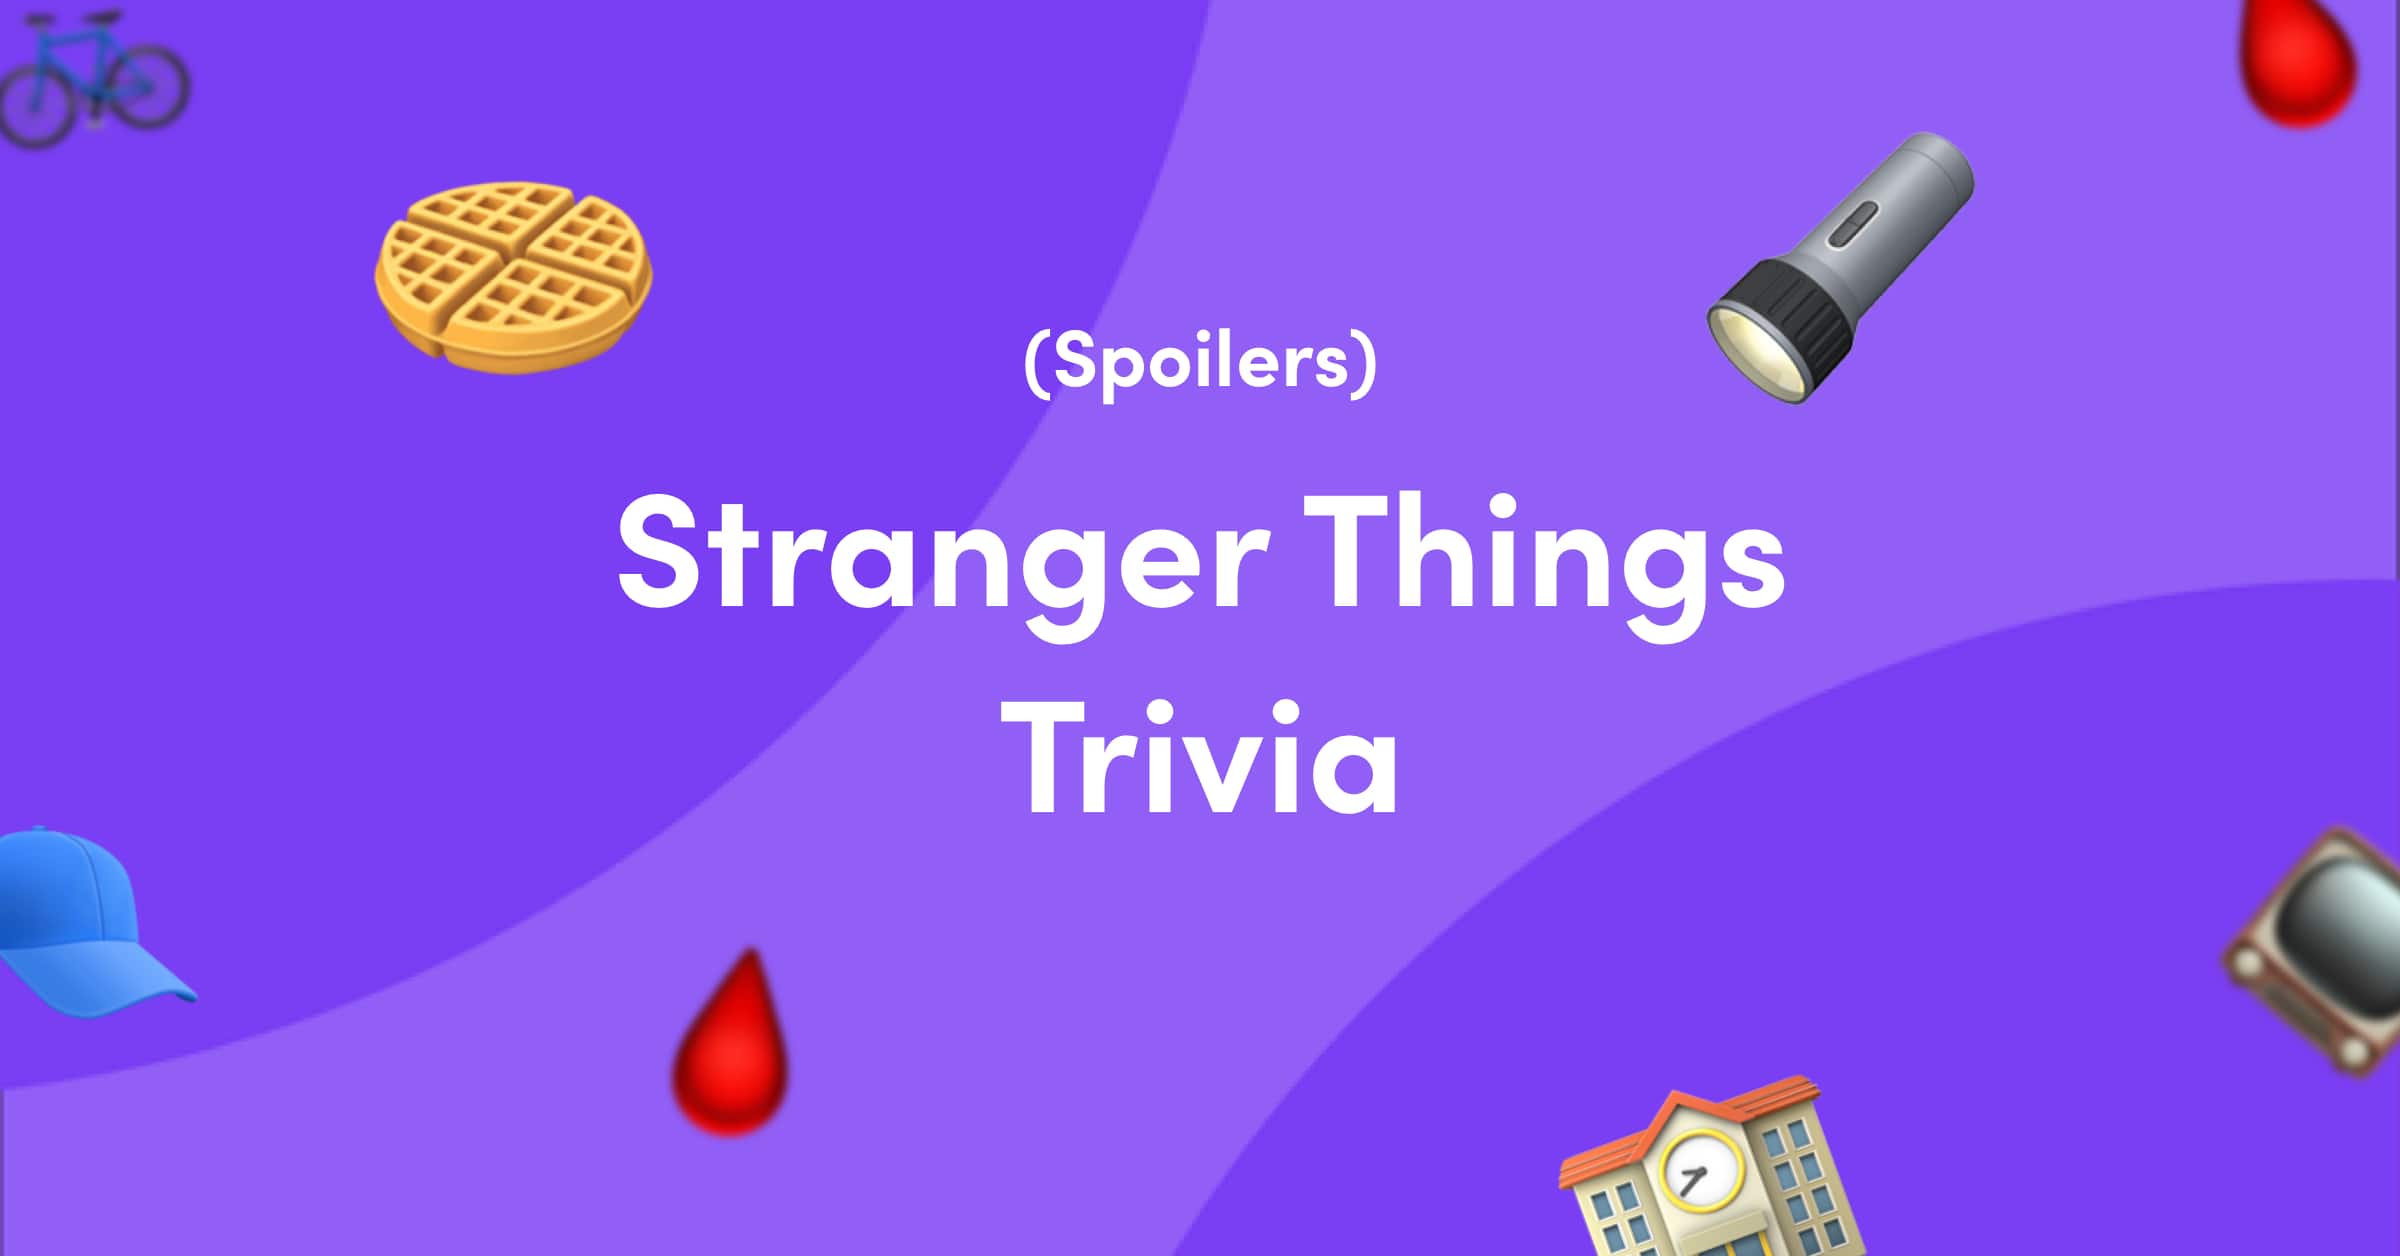 emojis on purple background for stranger things quiz questions and answers with spoilers